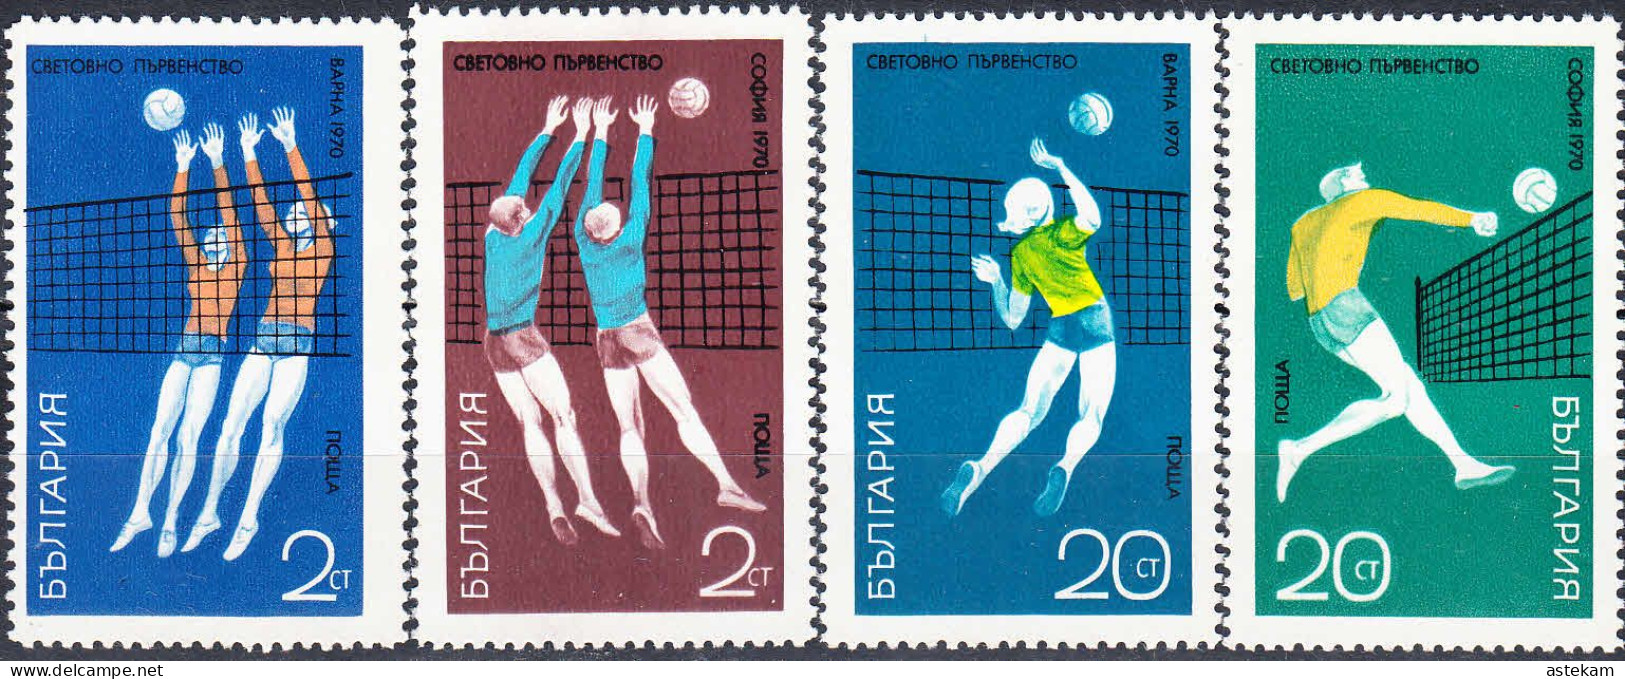 BULGARIA 1970, SPORT, WORLD VOLLEYBALL CHAMPIONSHIP For MEN And WOMEN In SOFIA, COMPLETE MNH SERIES With GOOD QUALITY*** - Unused Stamps